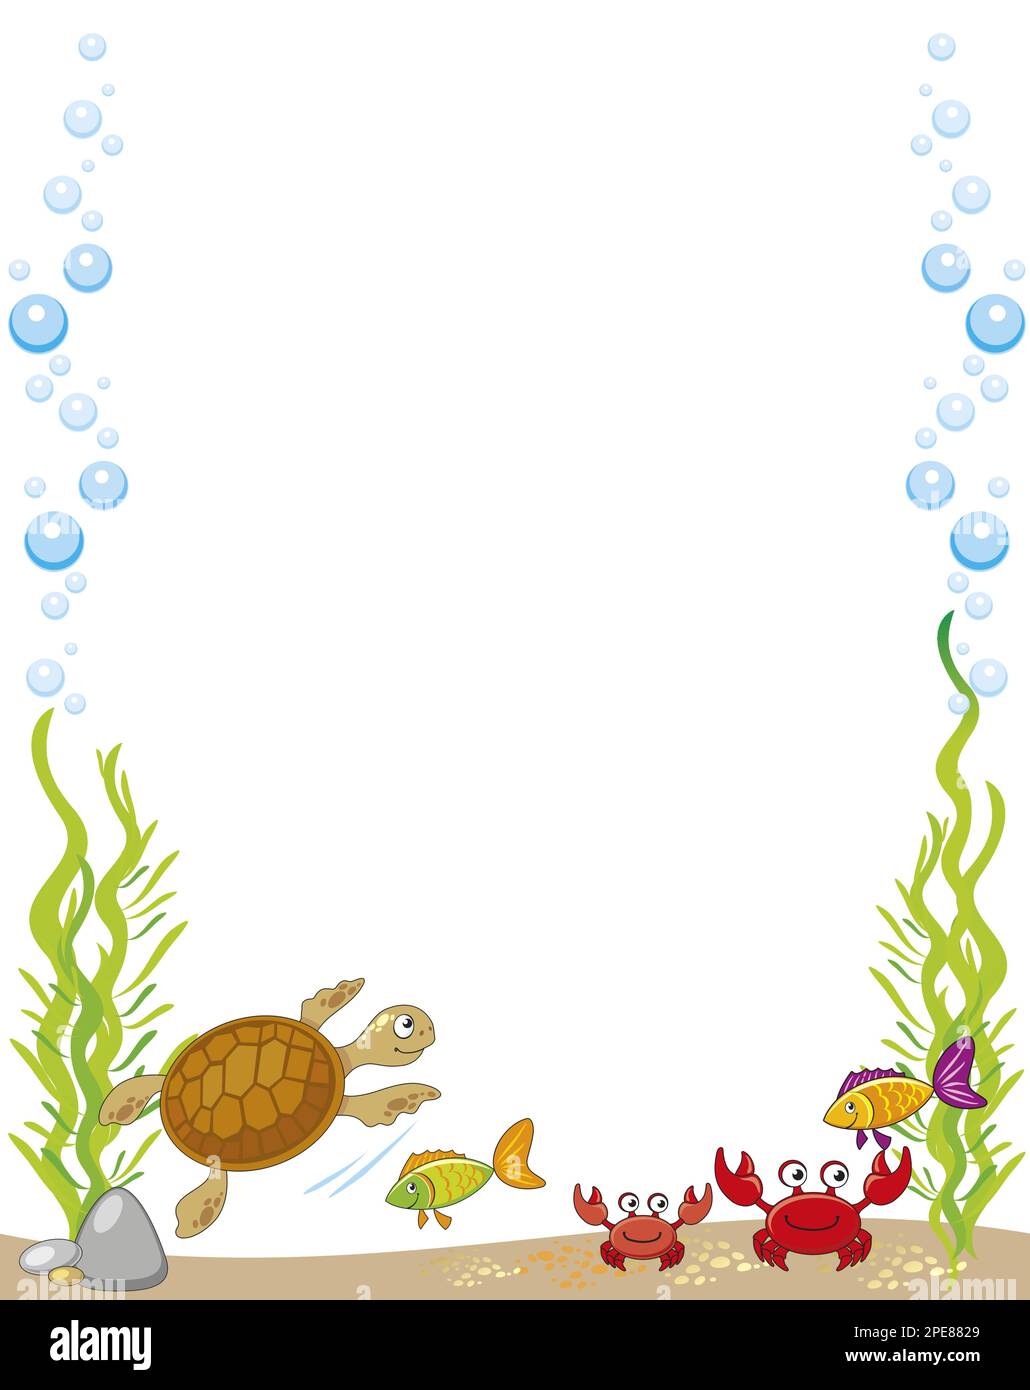 vector cartoon border, illustration of the underwater world with crabs, fishes, sandy bottom, rocks, algae, bubbles white background. Stock Vector